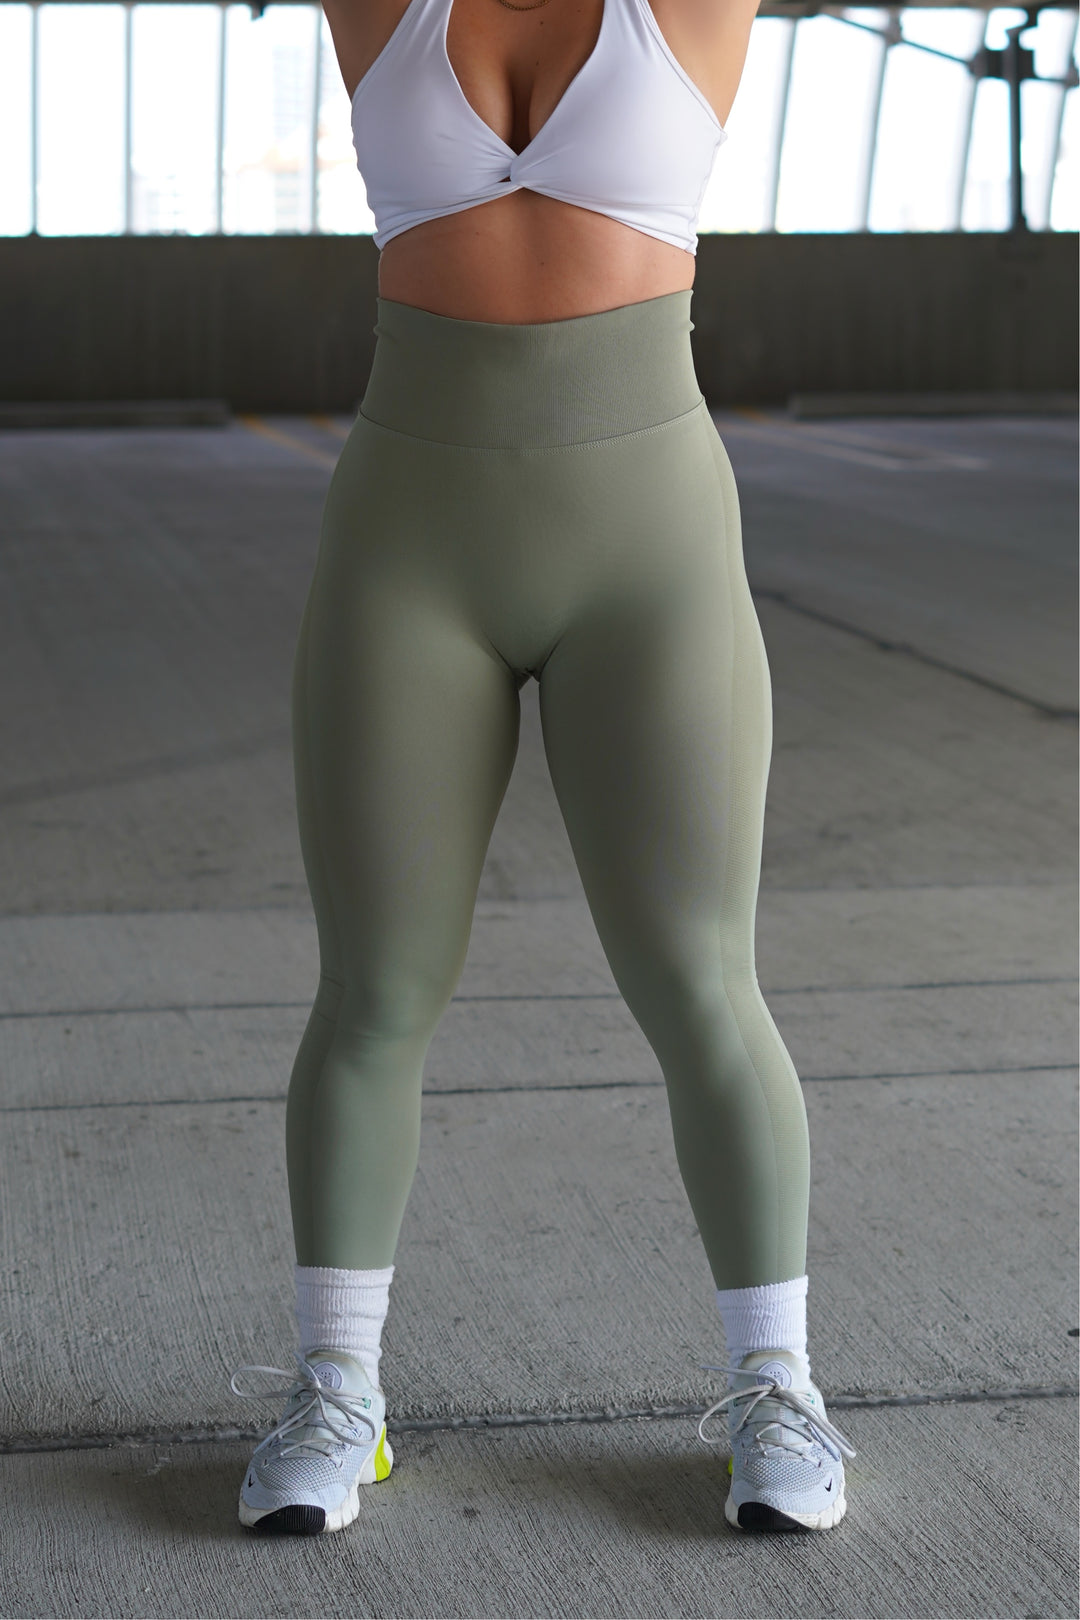 SCRUNCH BUTT POPCORN TEXTURED HIGH WAISTED LEGGINGS WITH POCKETS (OLIVE)